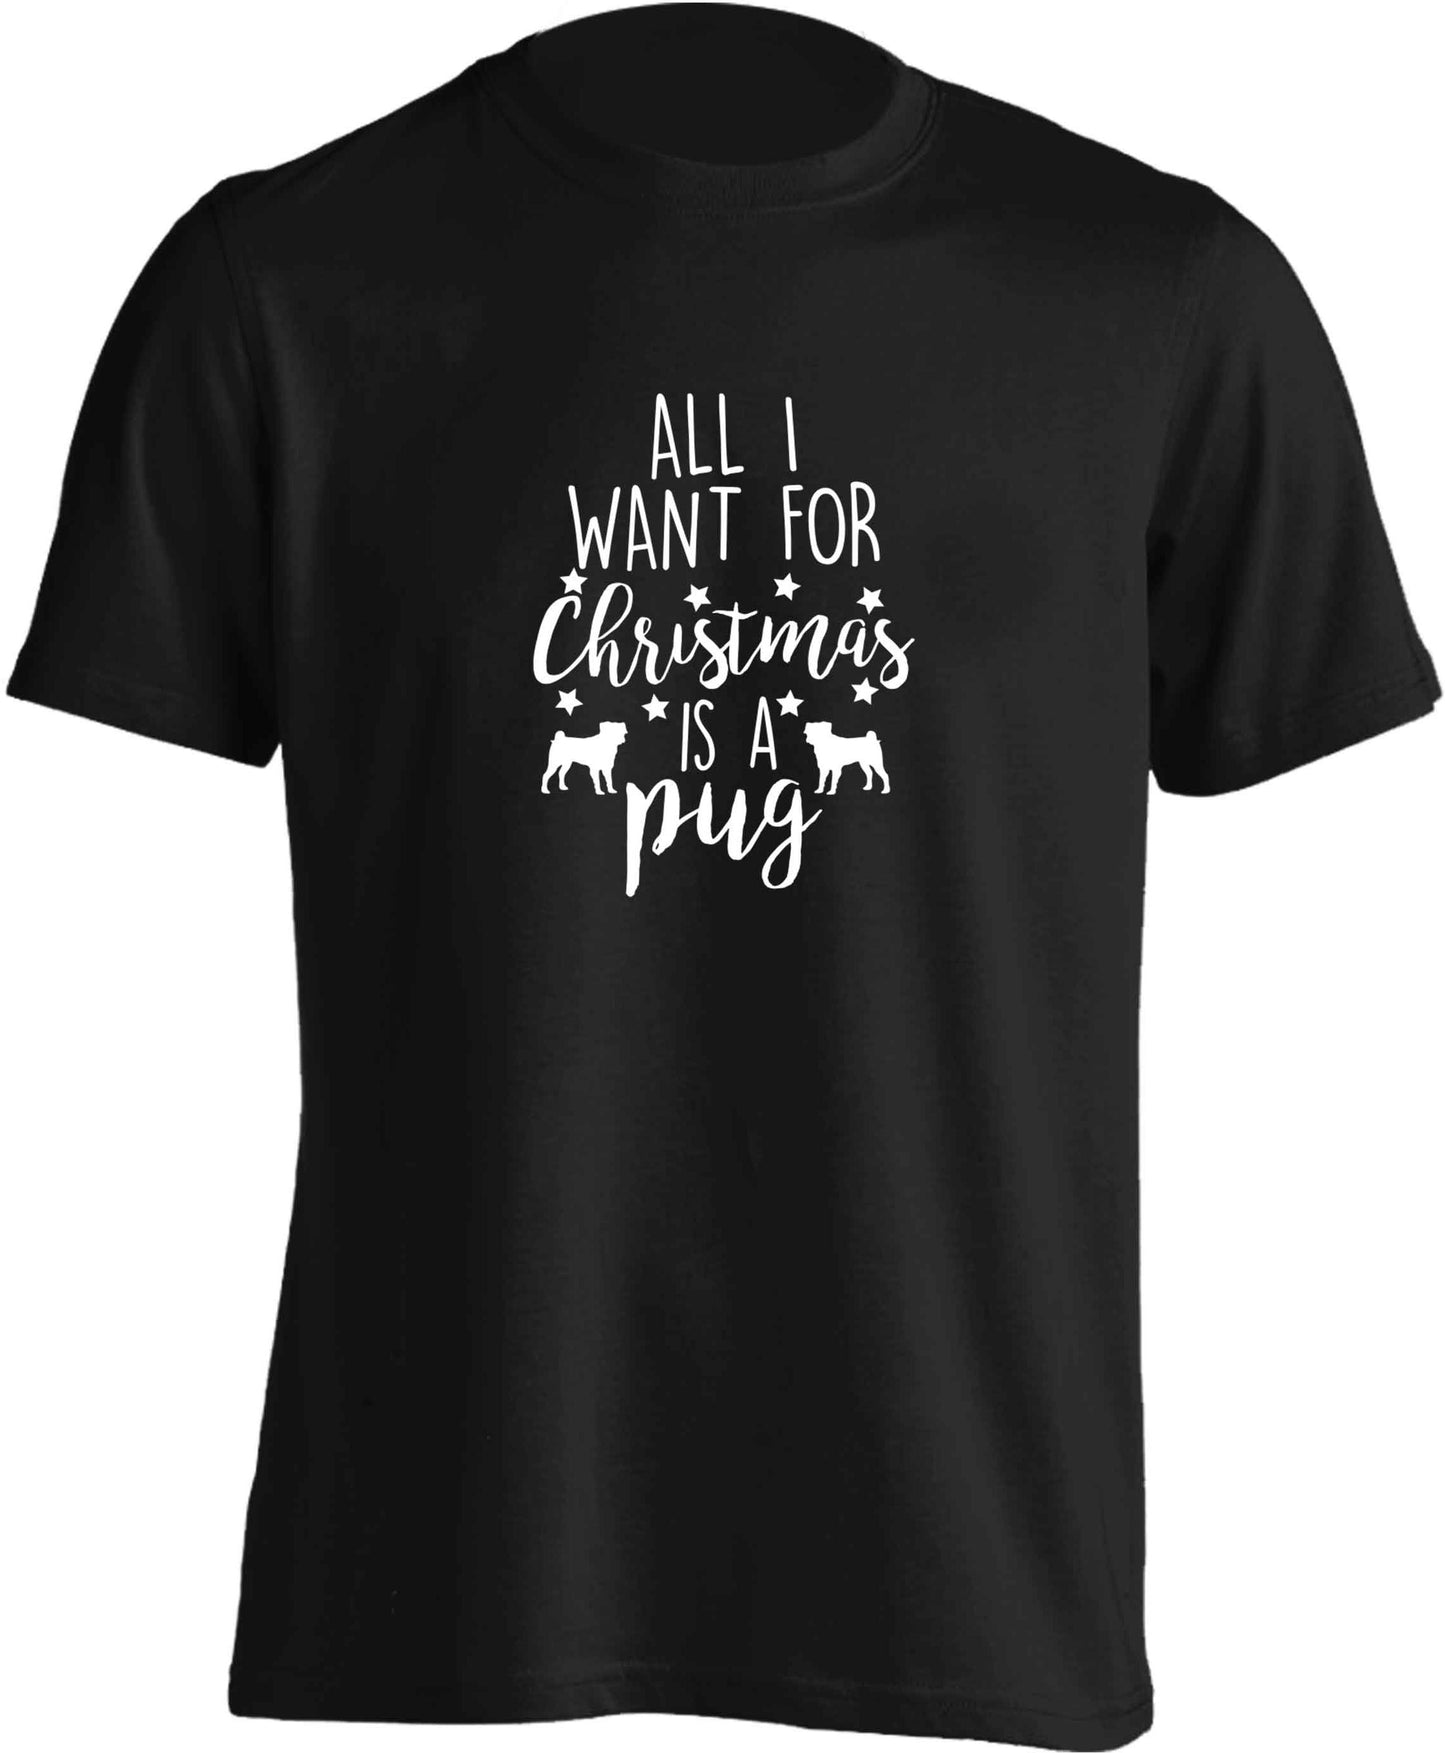 All I want for Christmas is a pug adults unisex black Tshirt 2XL